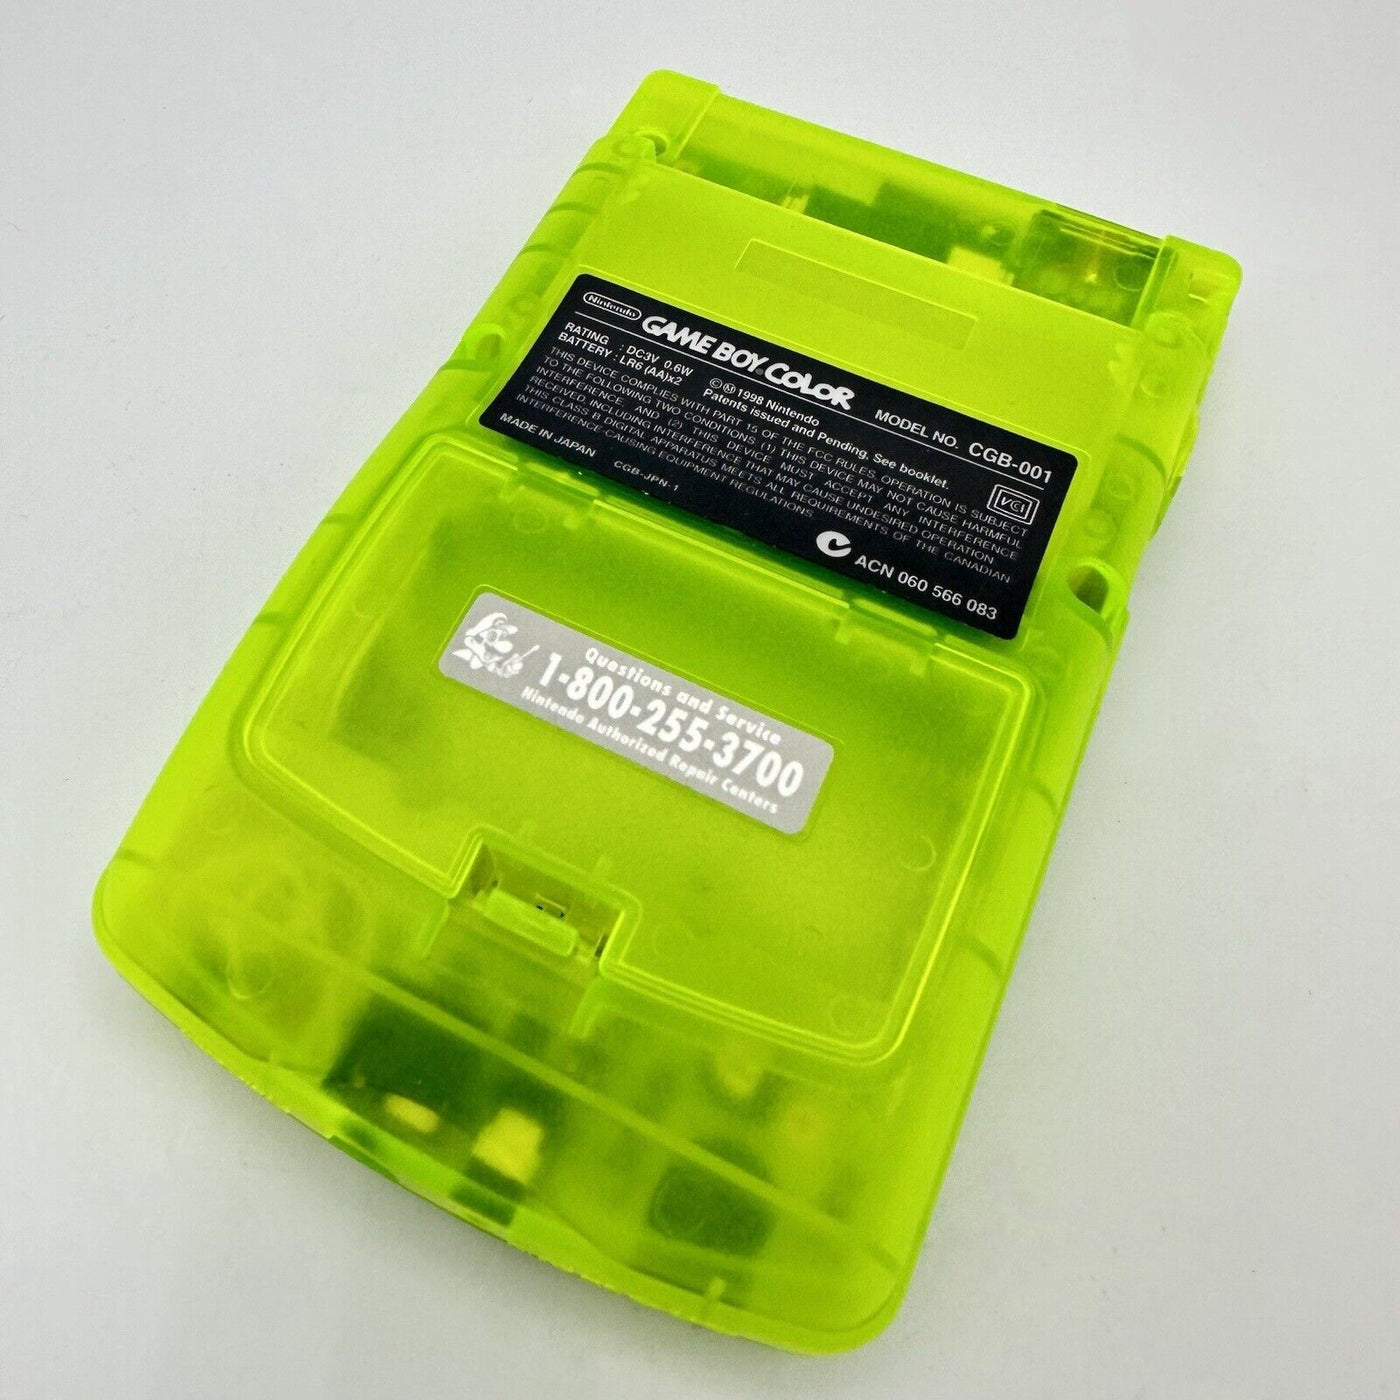 Game Boy Color IPS V2 Console - Extreme Green